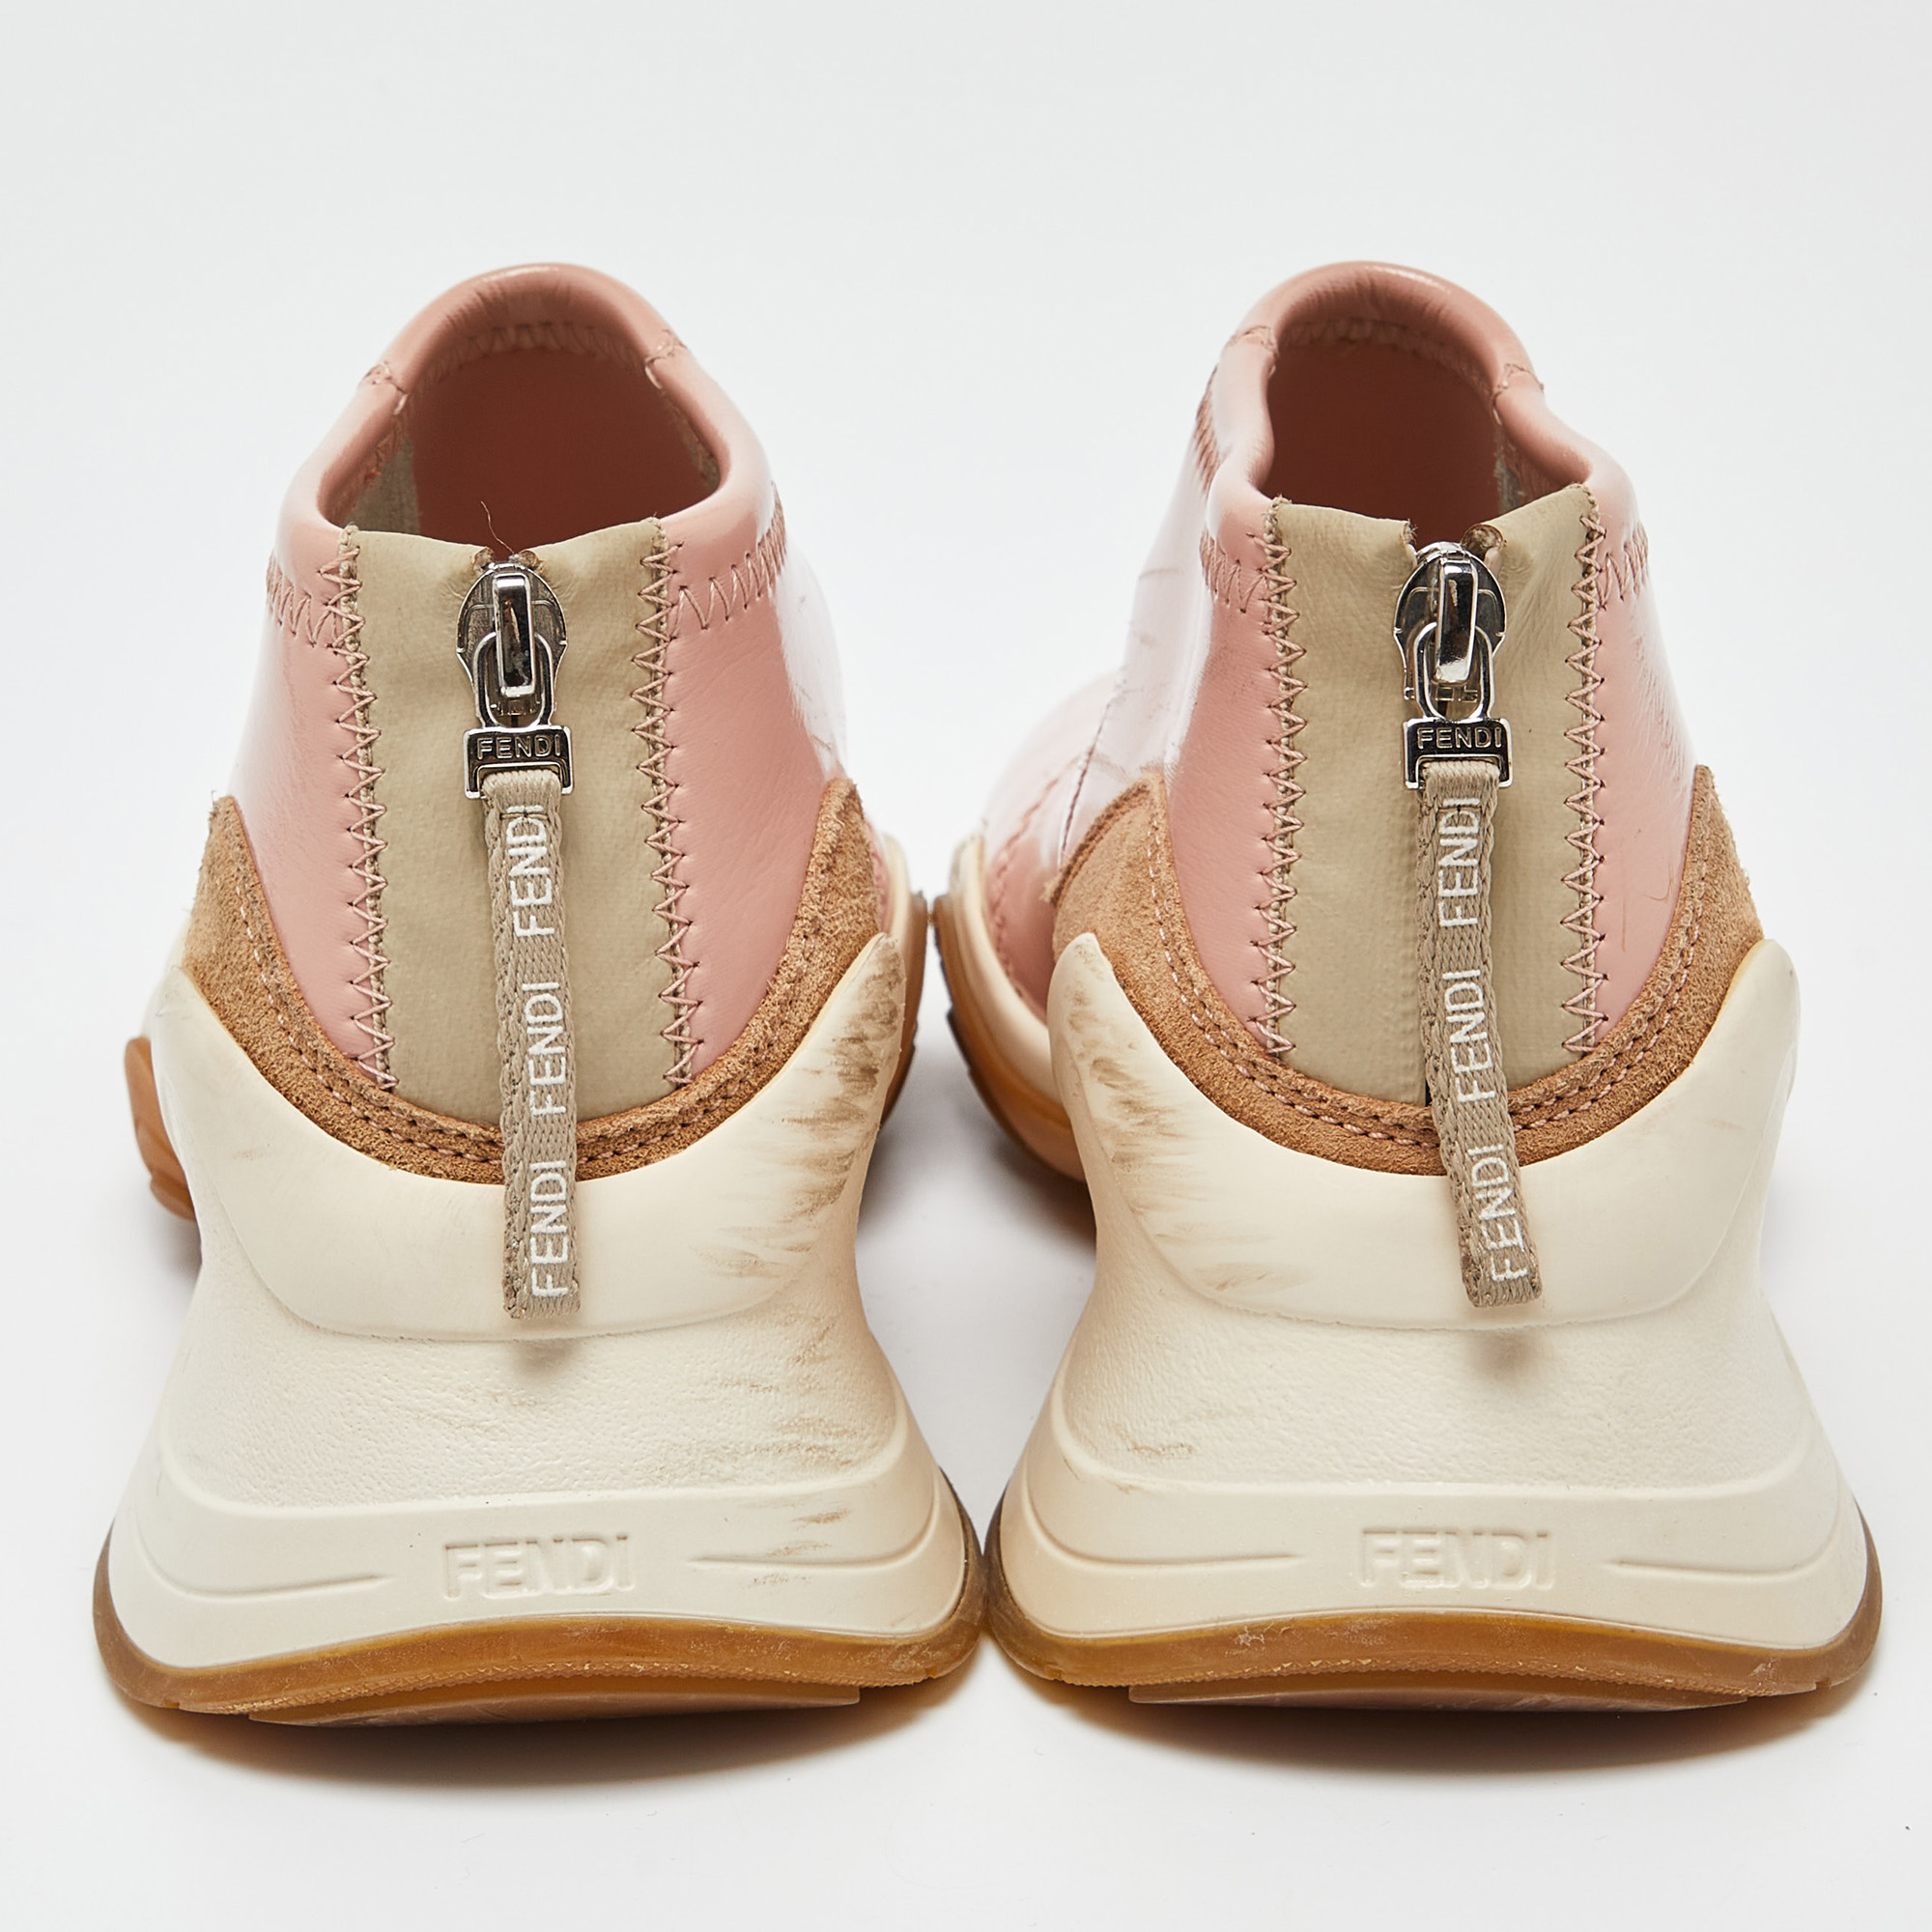 Fendi Pink Leather And Suede Zip Detail FFluid Slip On Sneakers Size 37.5